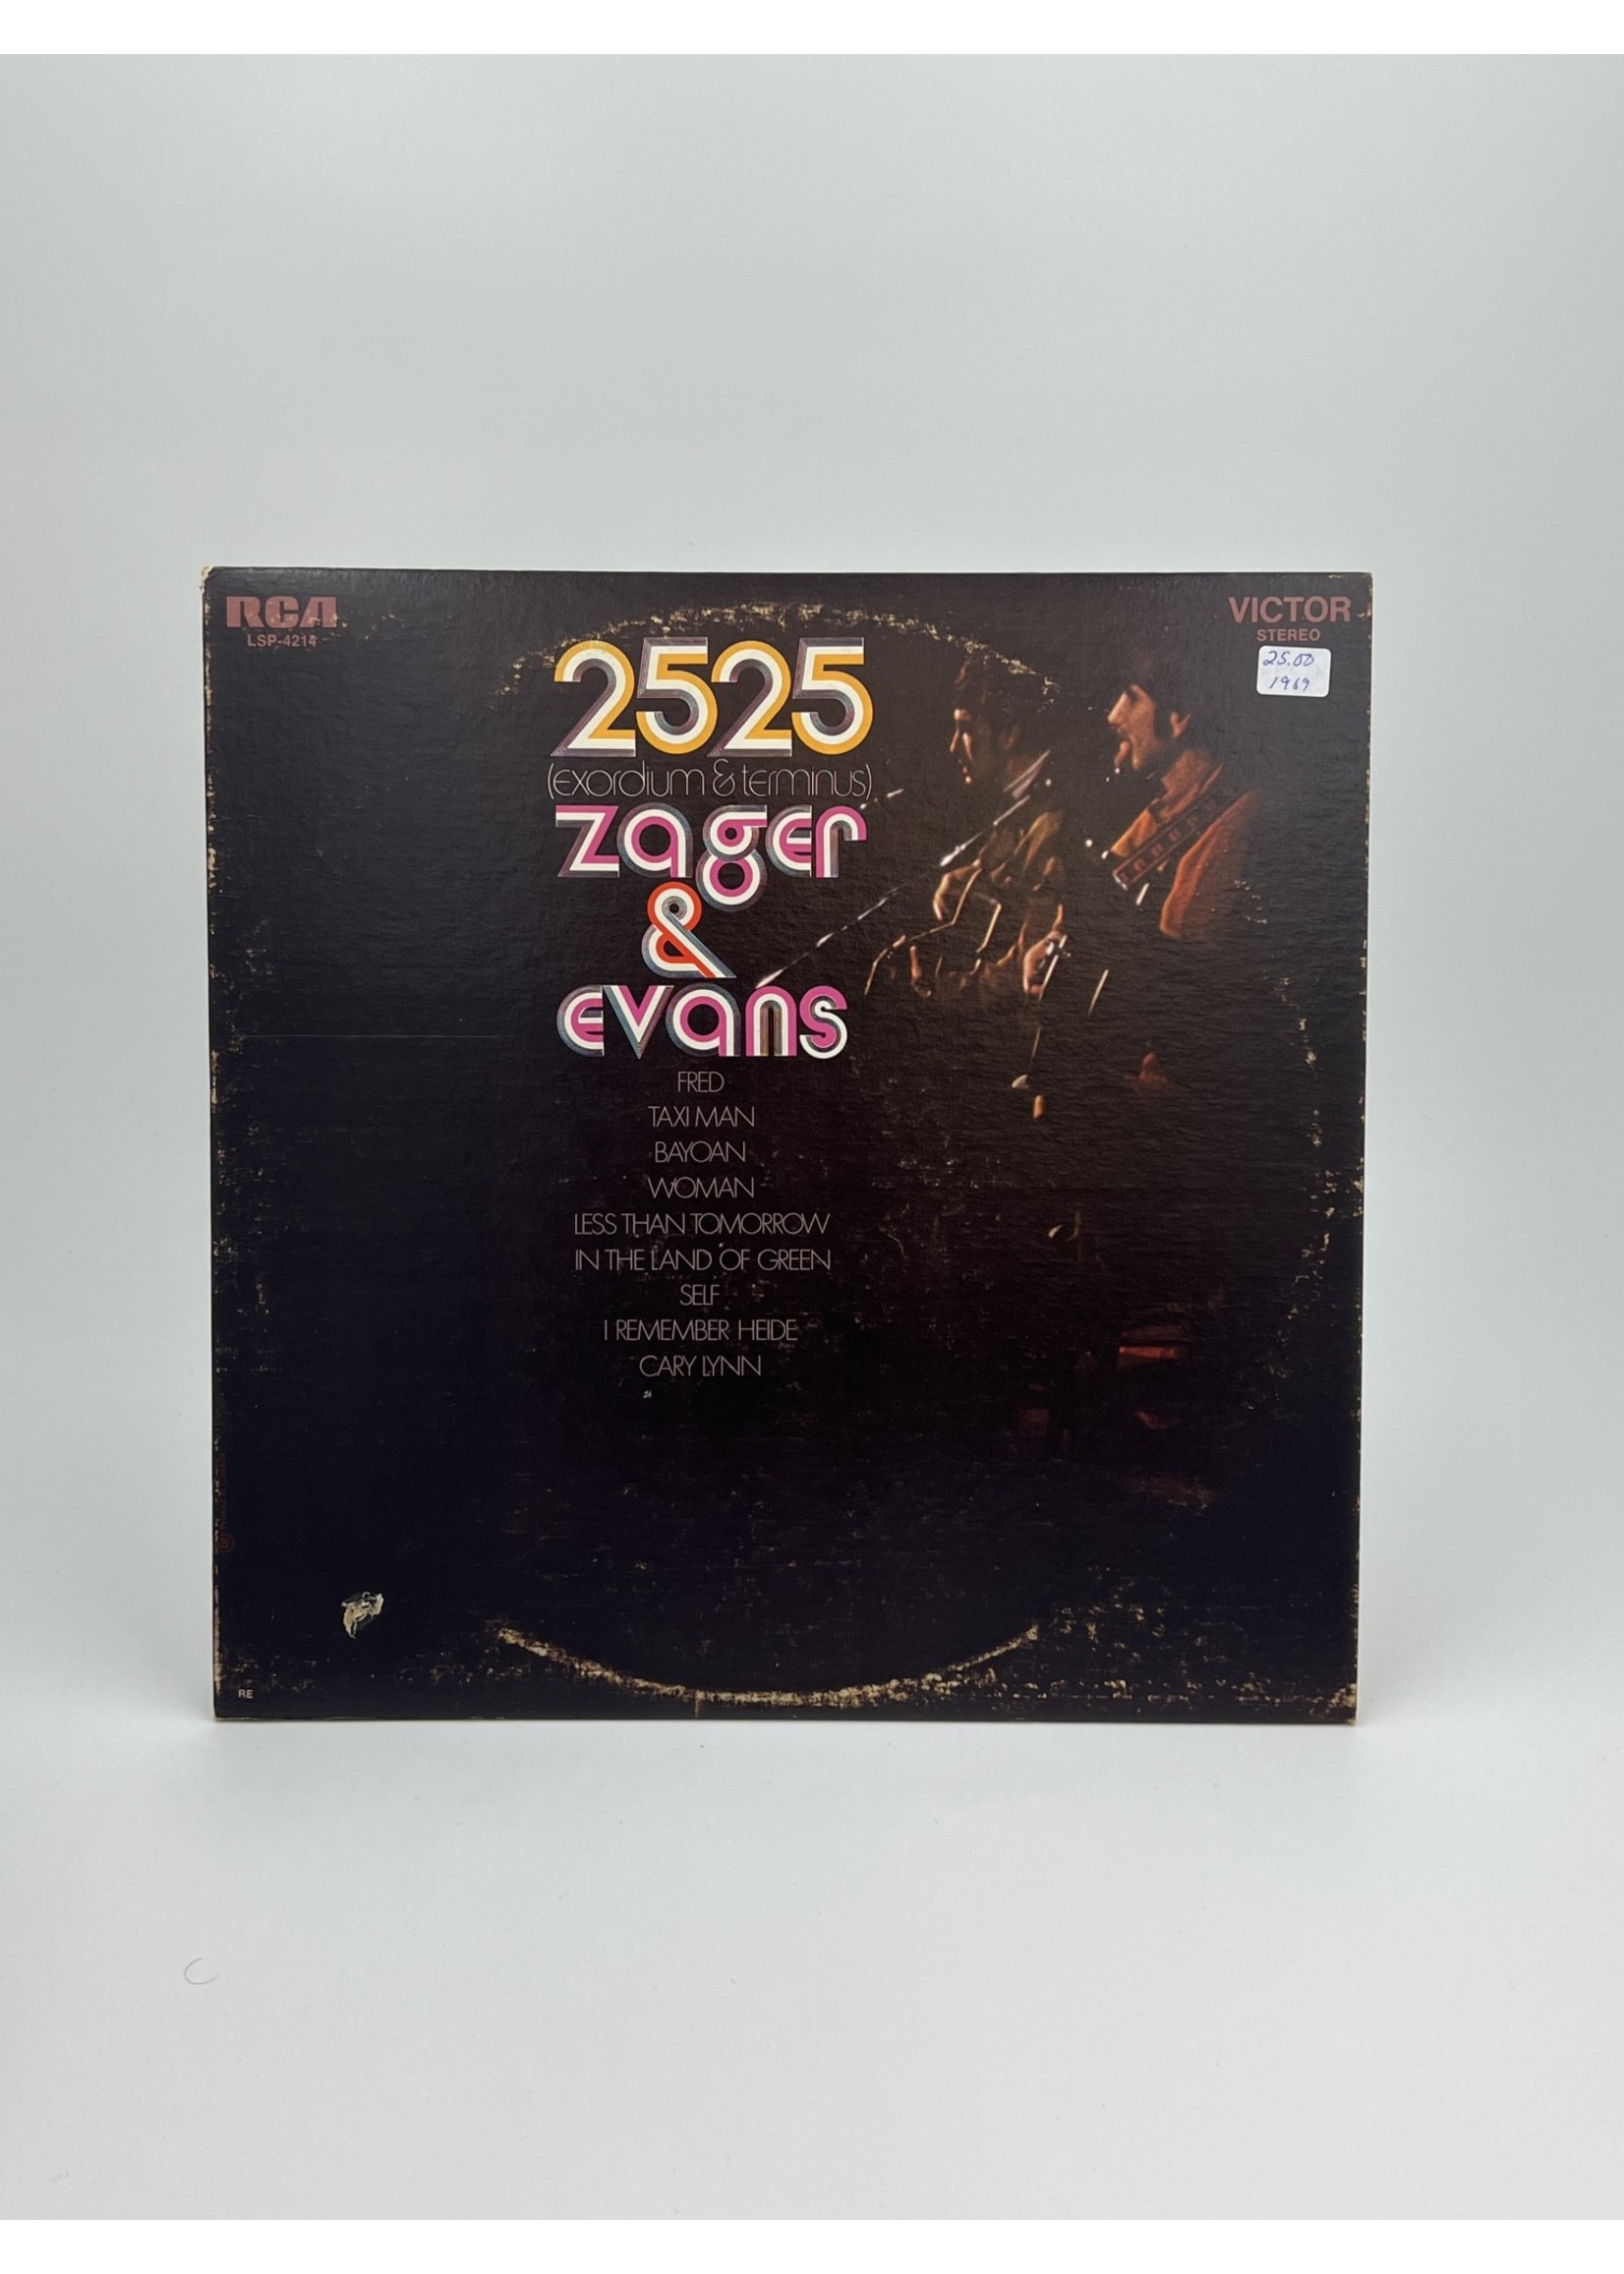 LP Zager and Evans 2525 LP Record